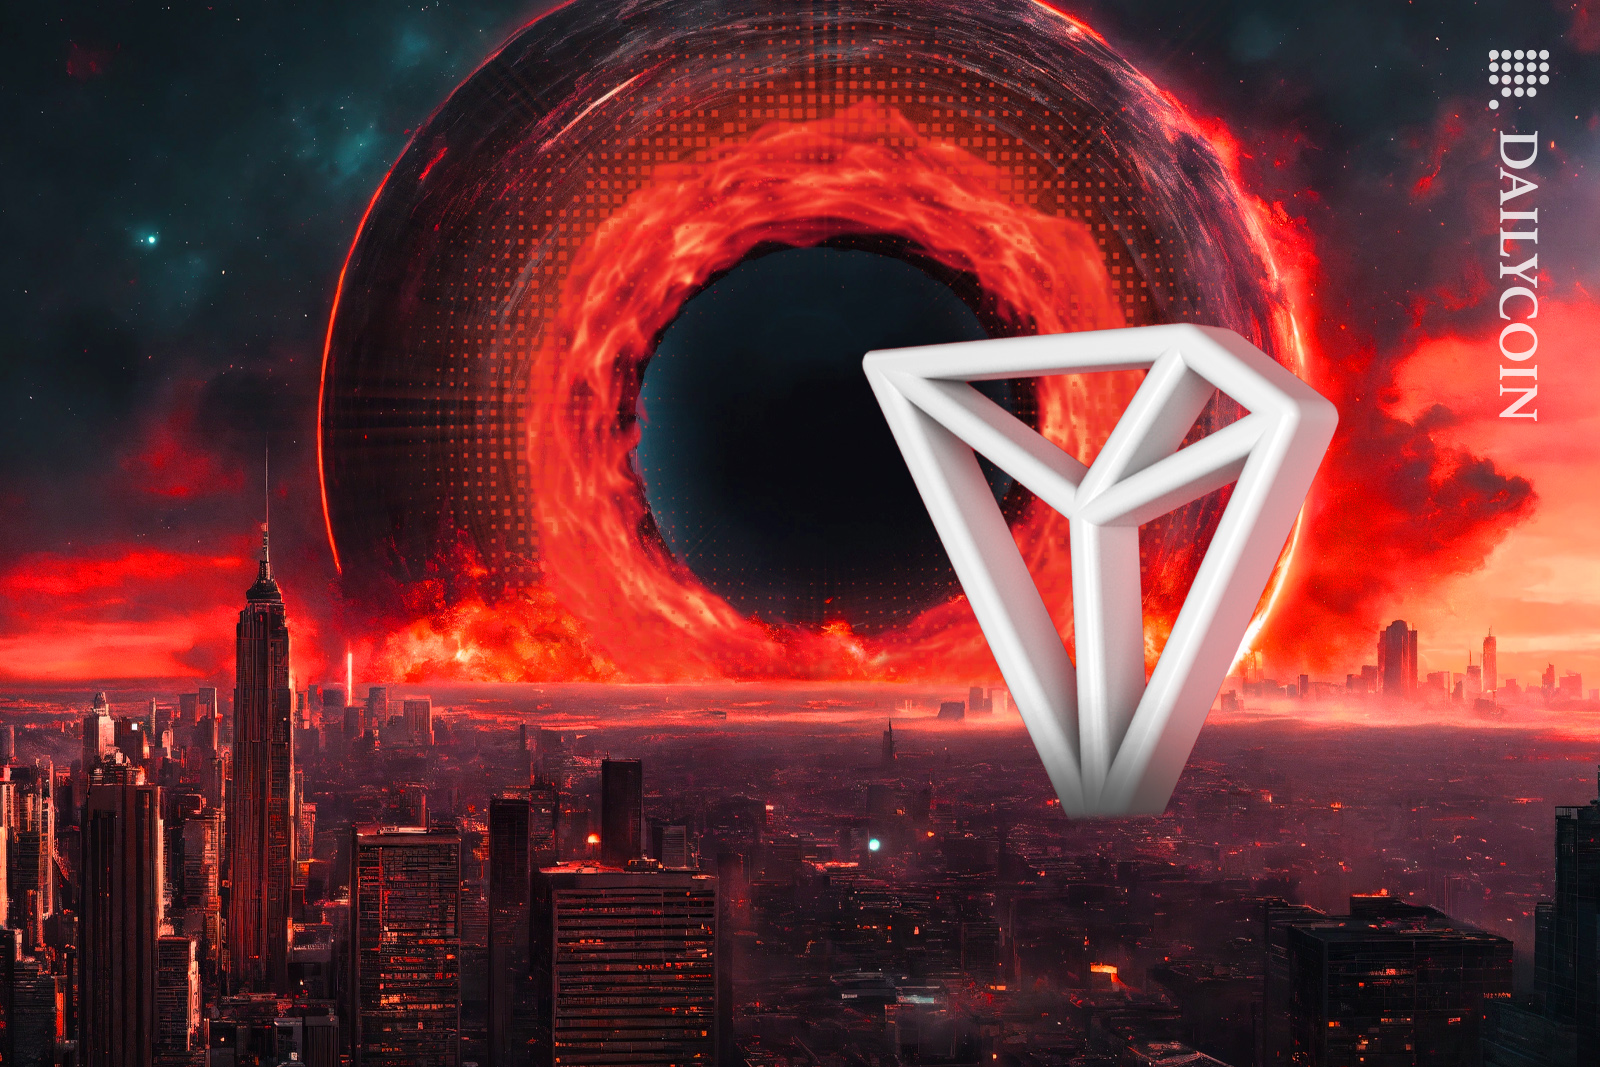 TRON burns over M TRX coins as fee revenue hits all-time high